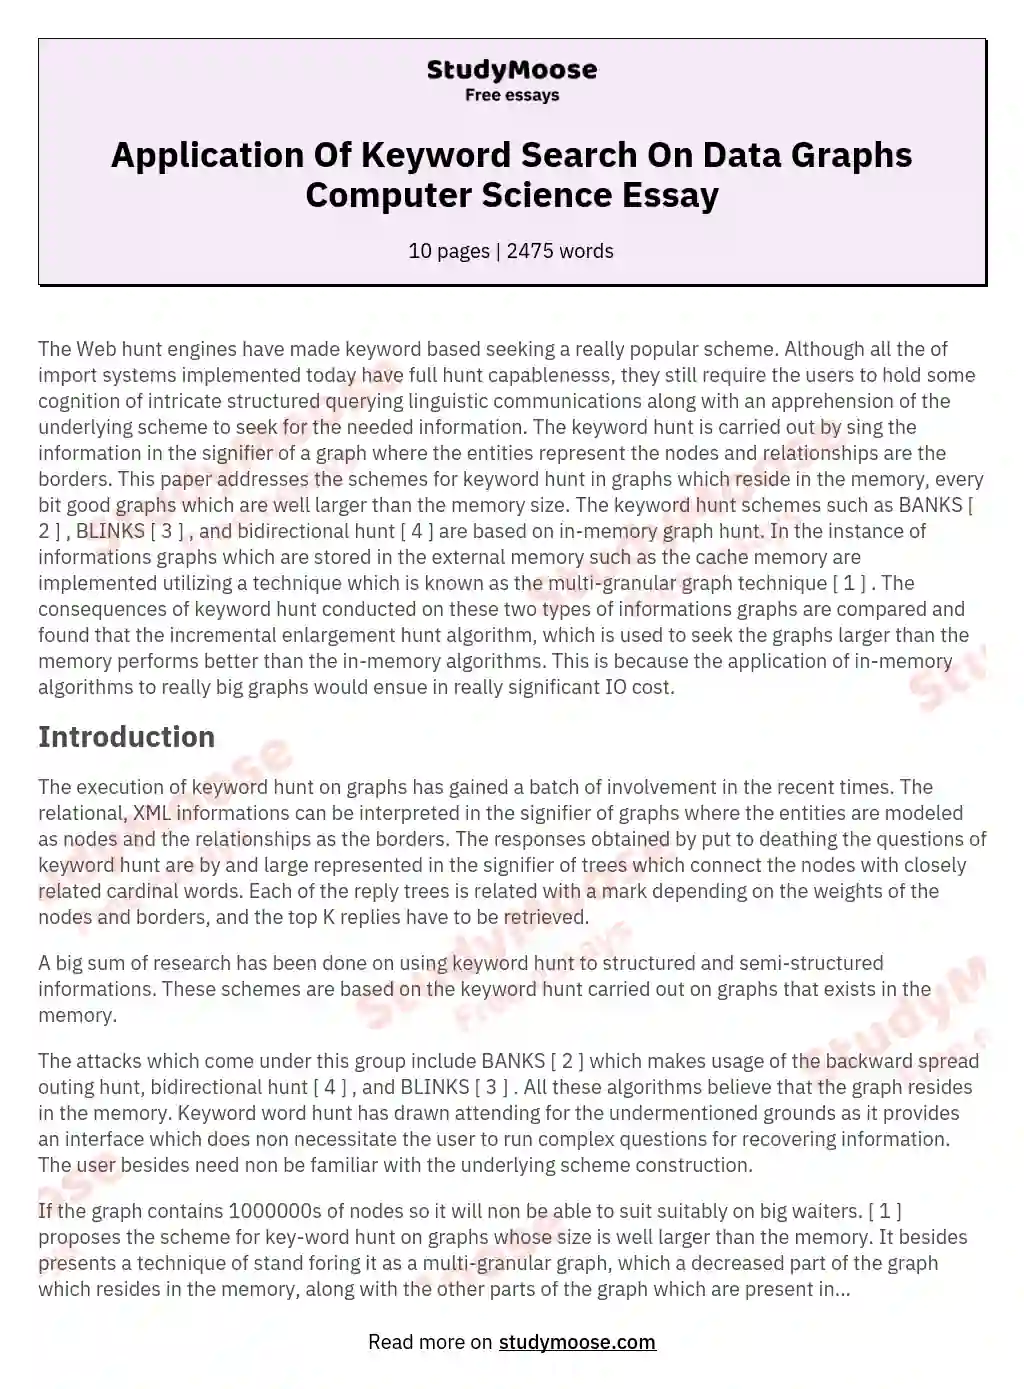 Application Of Keyword Search On Data Graphs Computer Science Essay essay